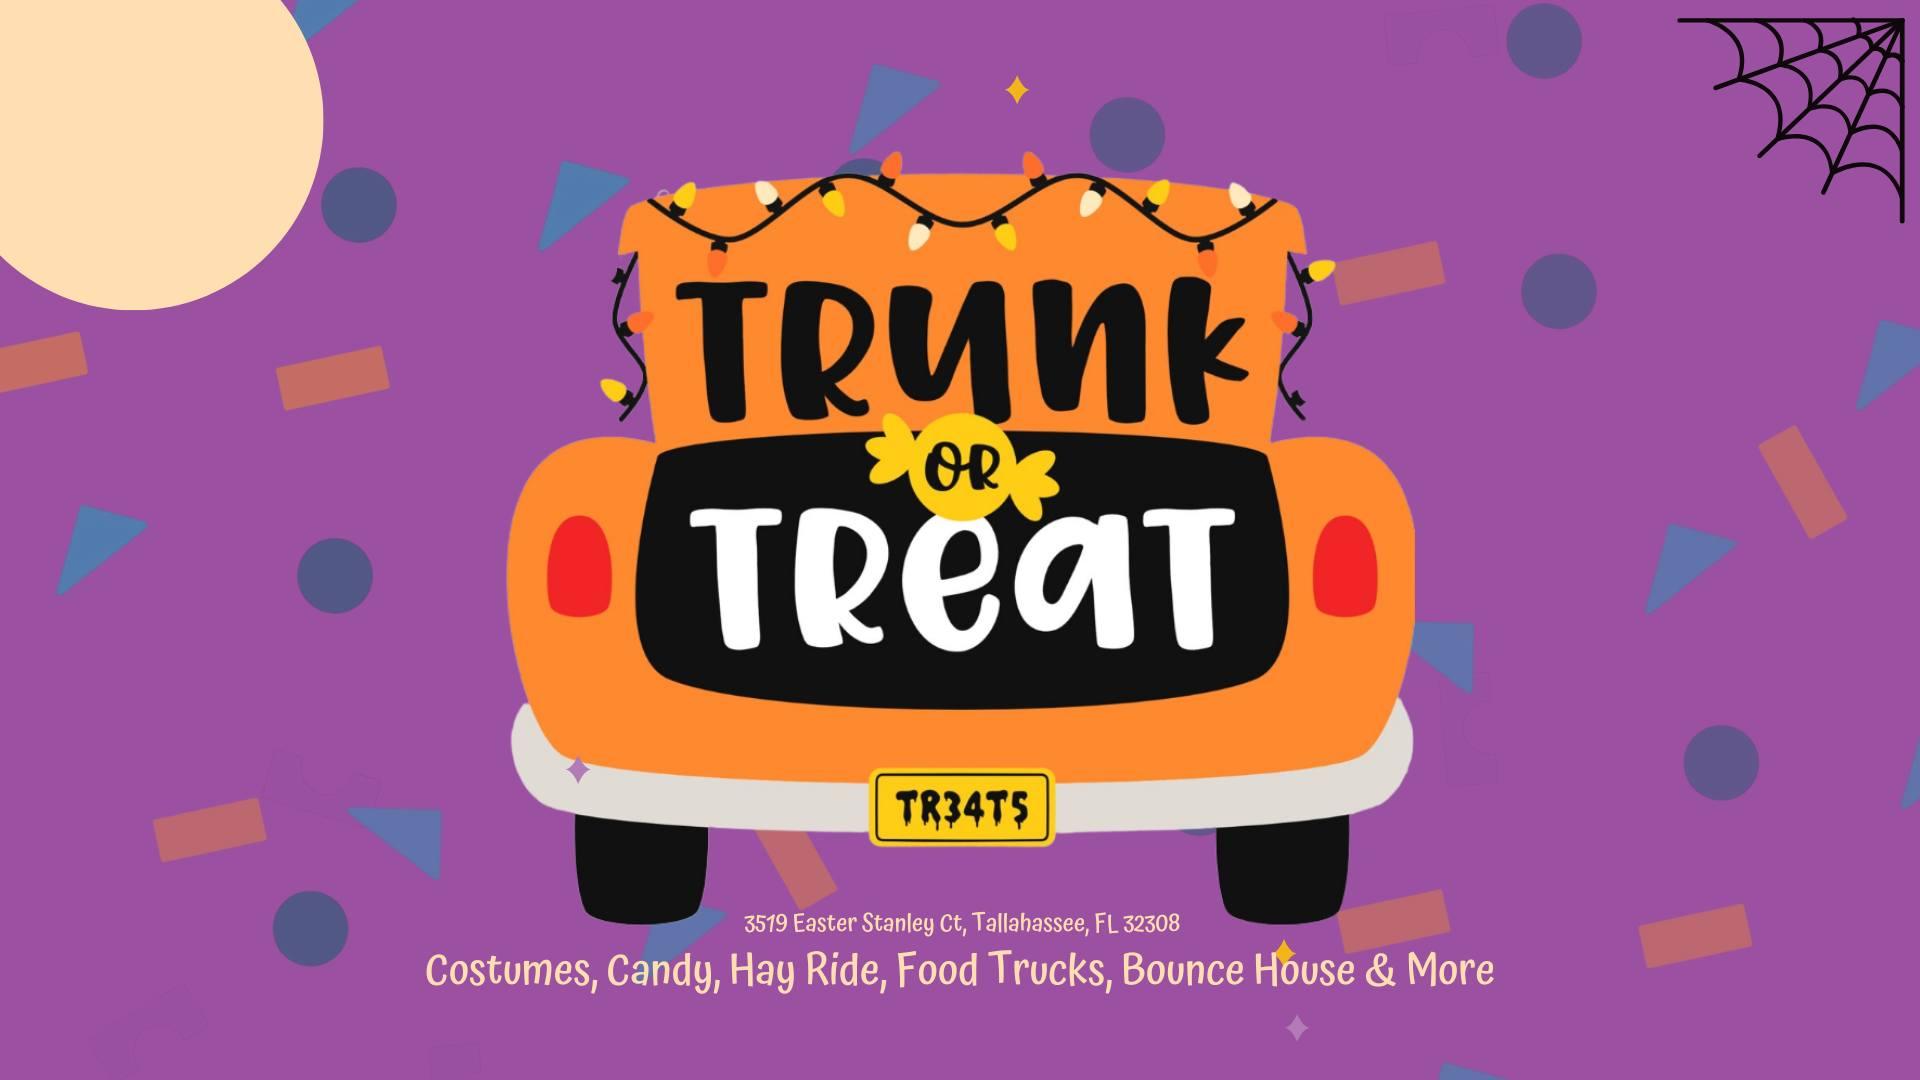 Trunk or Treat in The Learning Pavilion
Fri Oct 21, 5:00 PM - Fri Oct 21, 7:30 PM